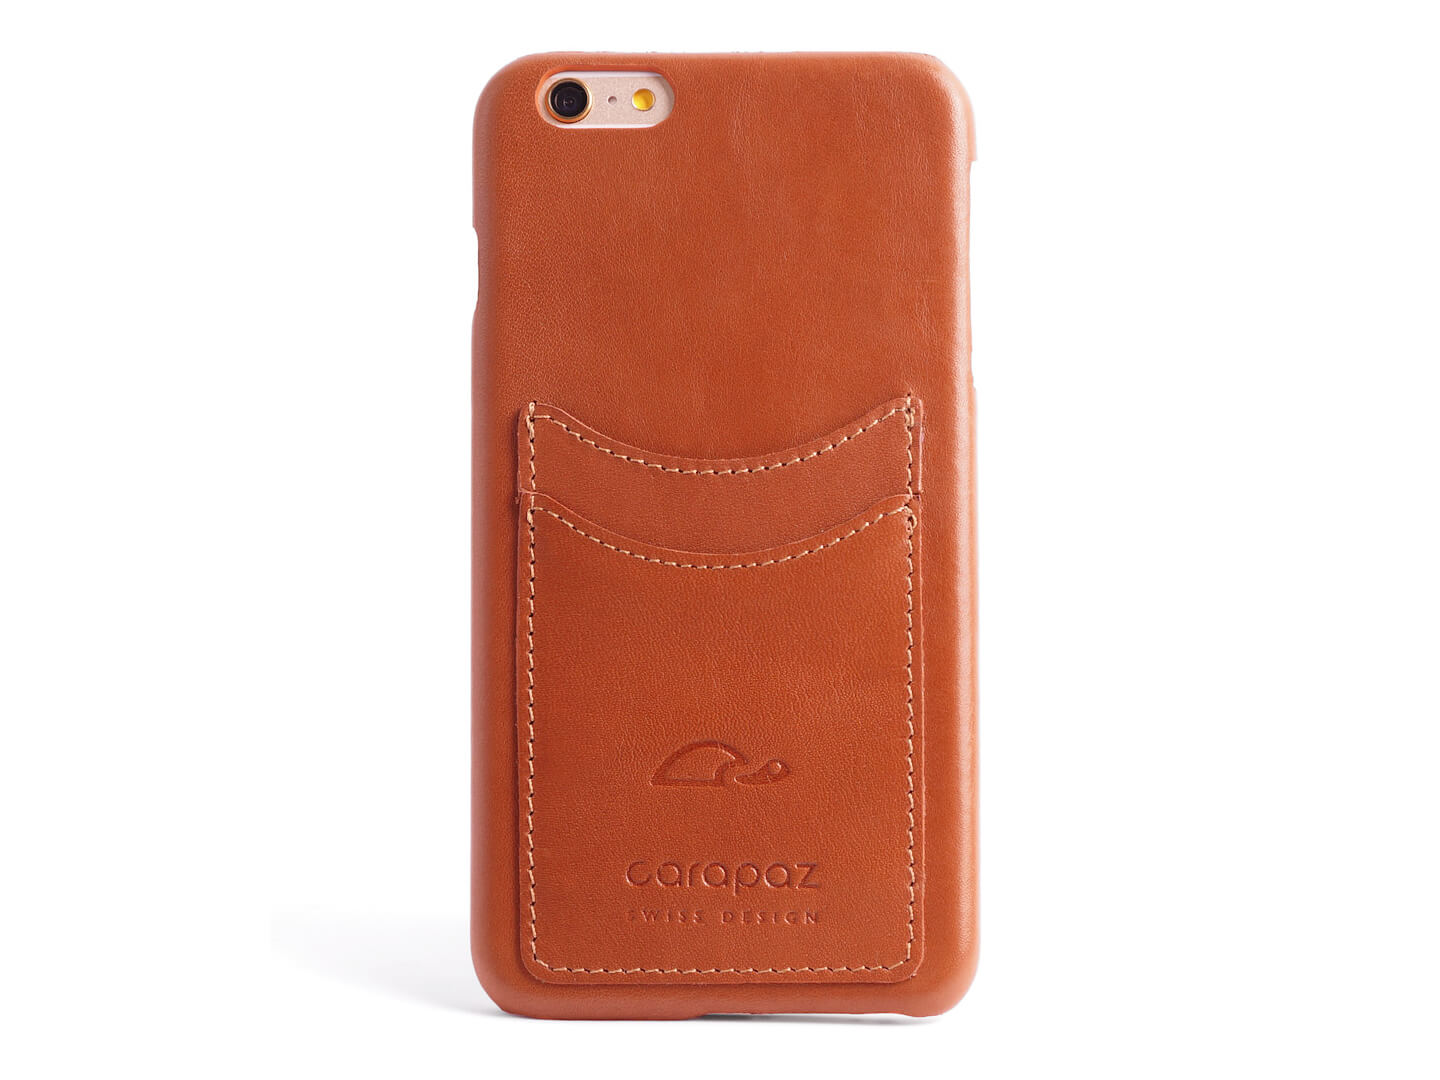 Leather Slim Case for iPhone 6 / 6S Plus - Carapaz